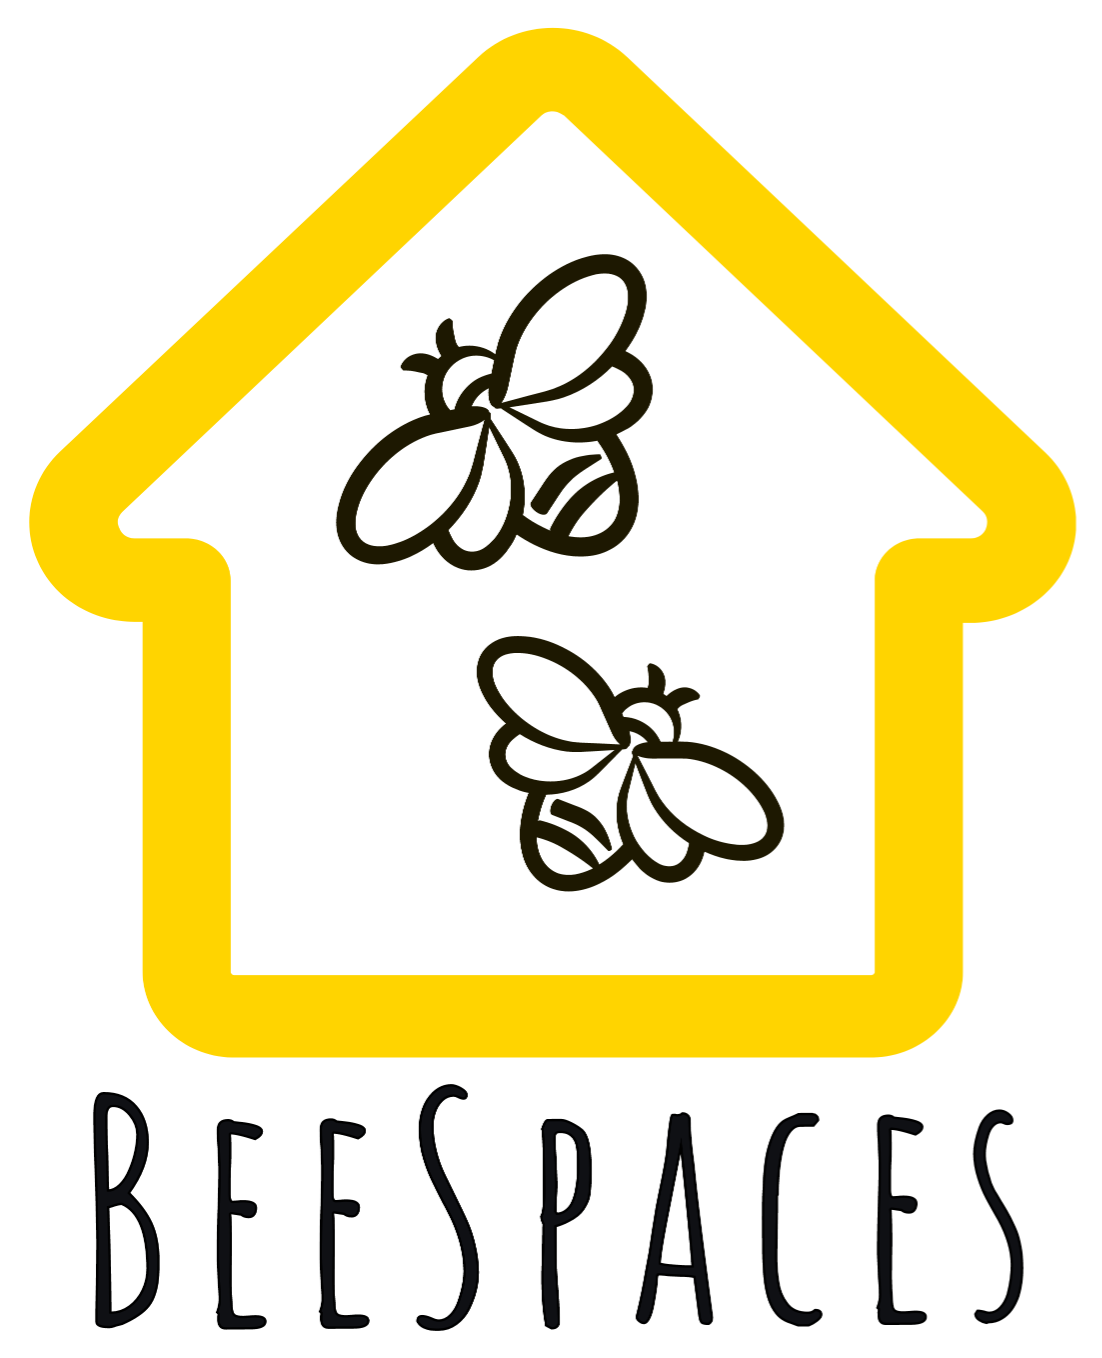 BeeSpaces.org